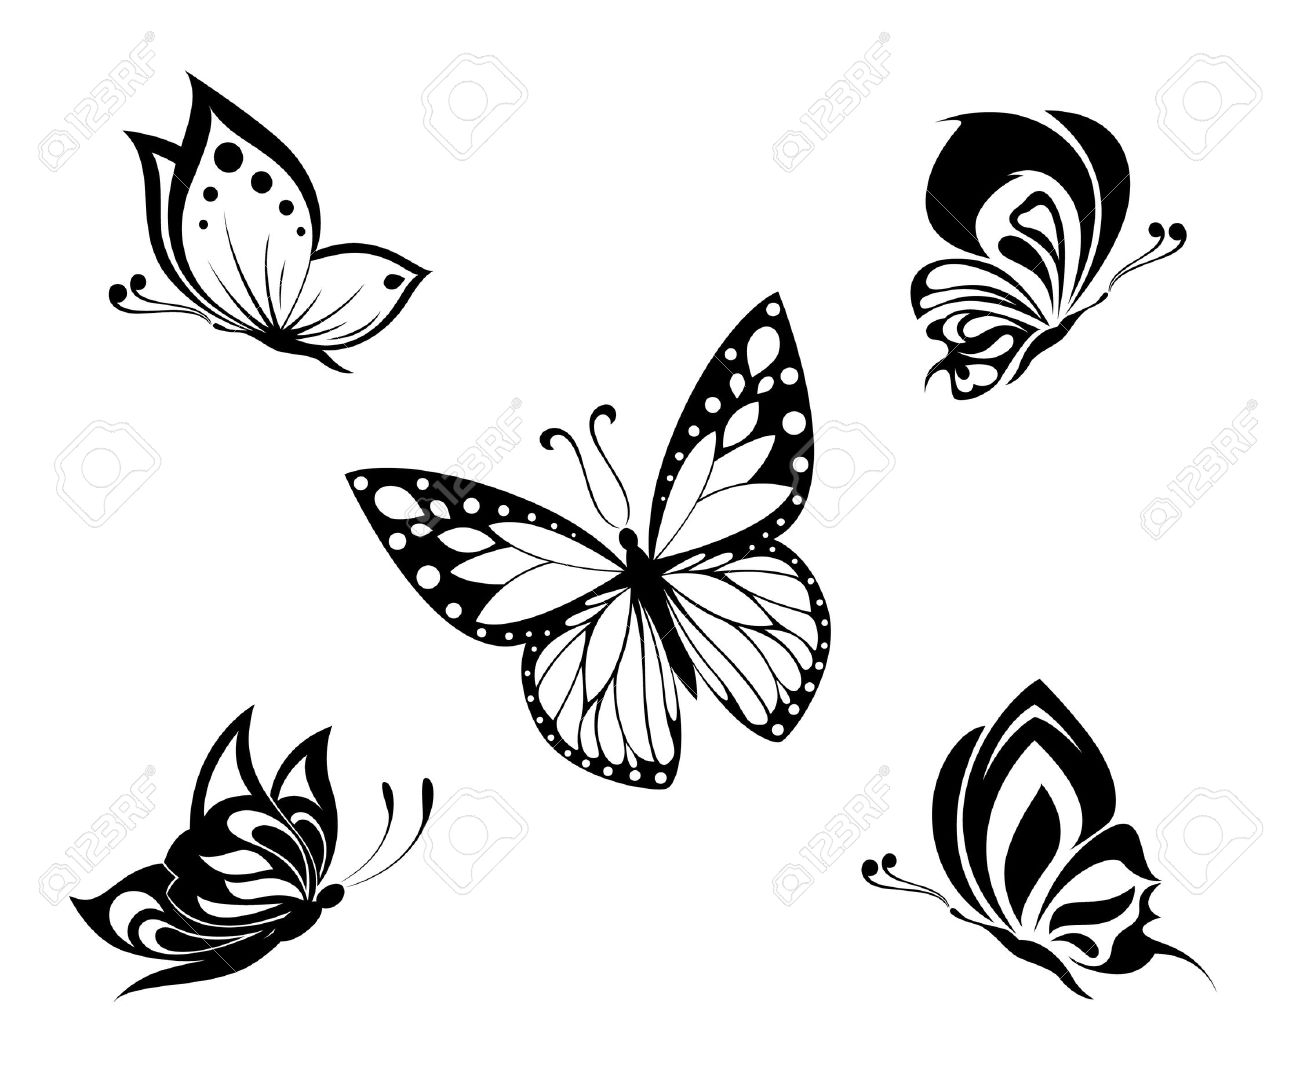 Tattoo Black And White Butterflies Set Royalty Free Cliparts inside dimensions 1300 X 1083